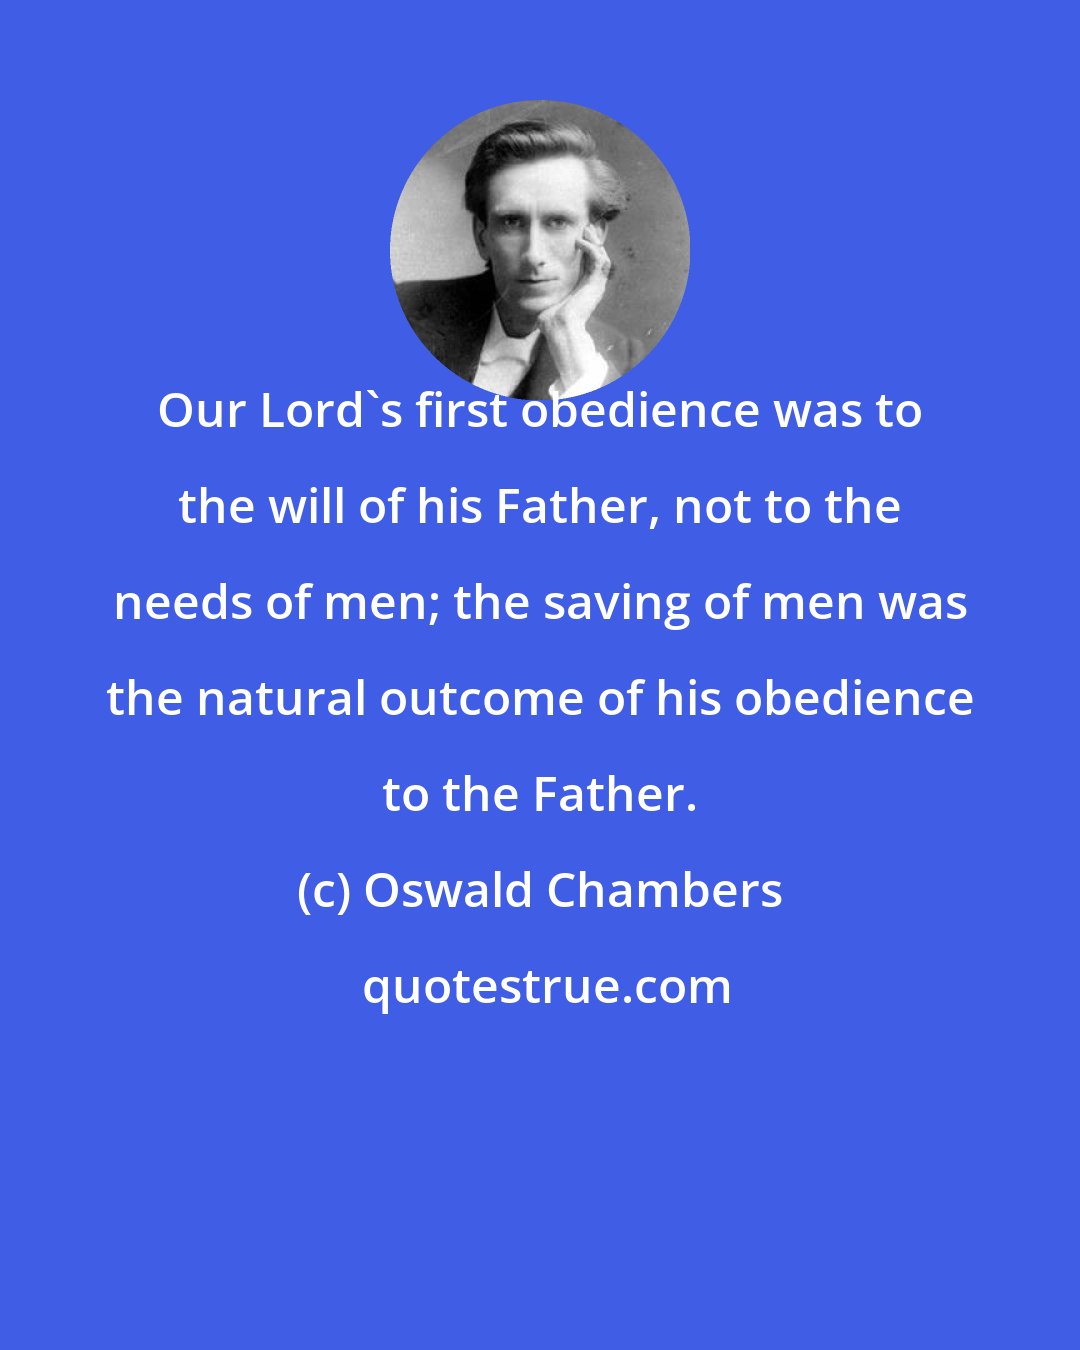 Oswald Chambers: Our Lord's first obedience was to the will of his Father, not to the needs of men; the saving of men was the natural outcome of his obedience to the Father.